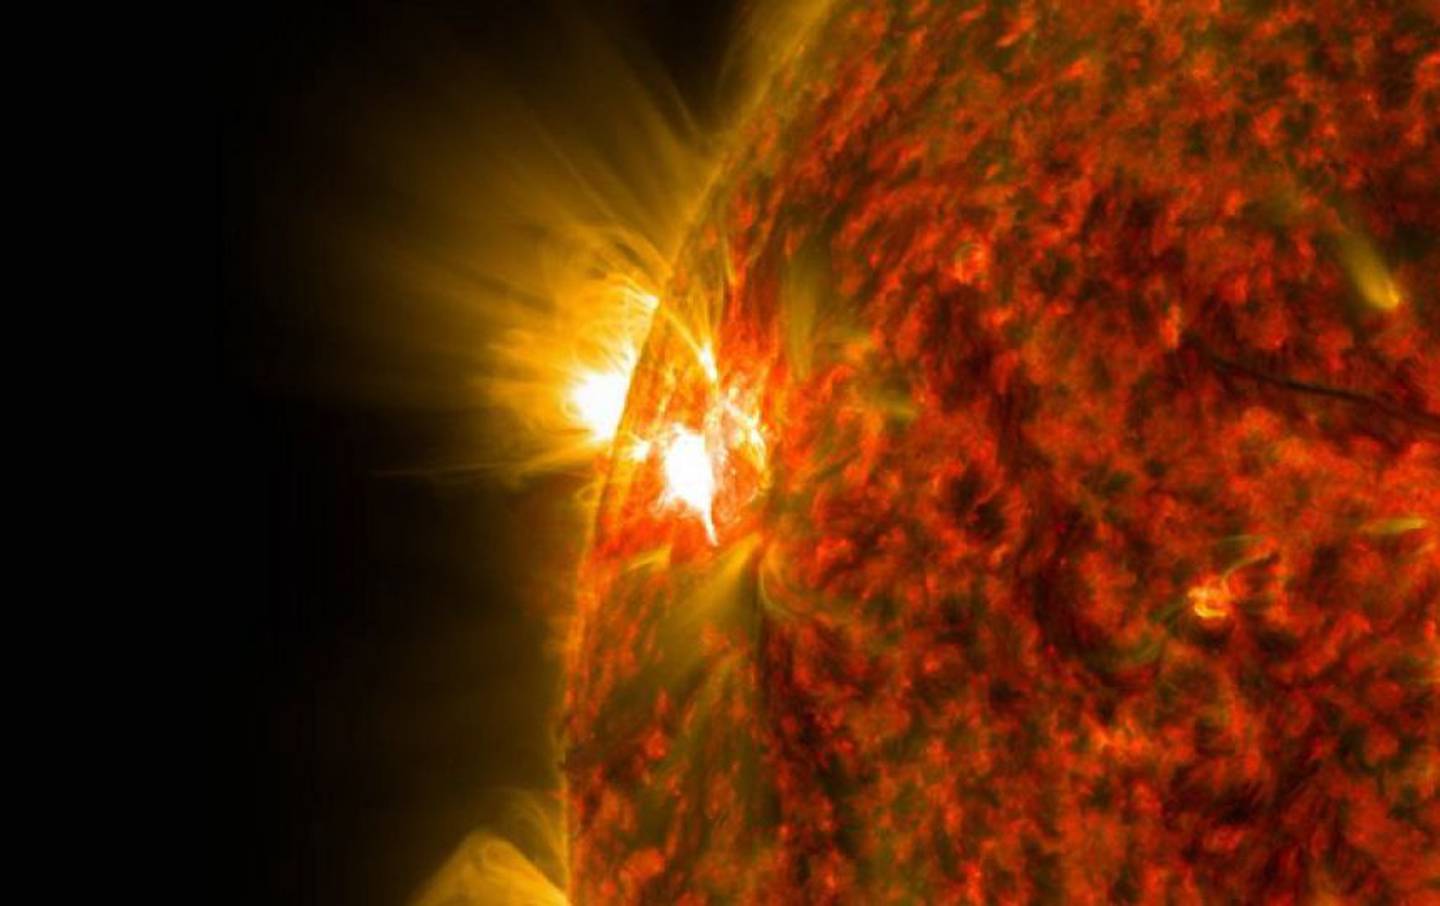 With the force of 10 billion nuclear bombs: This was the largest solar storm in history